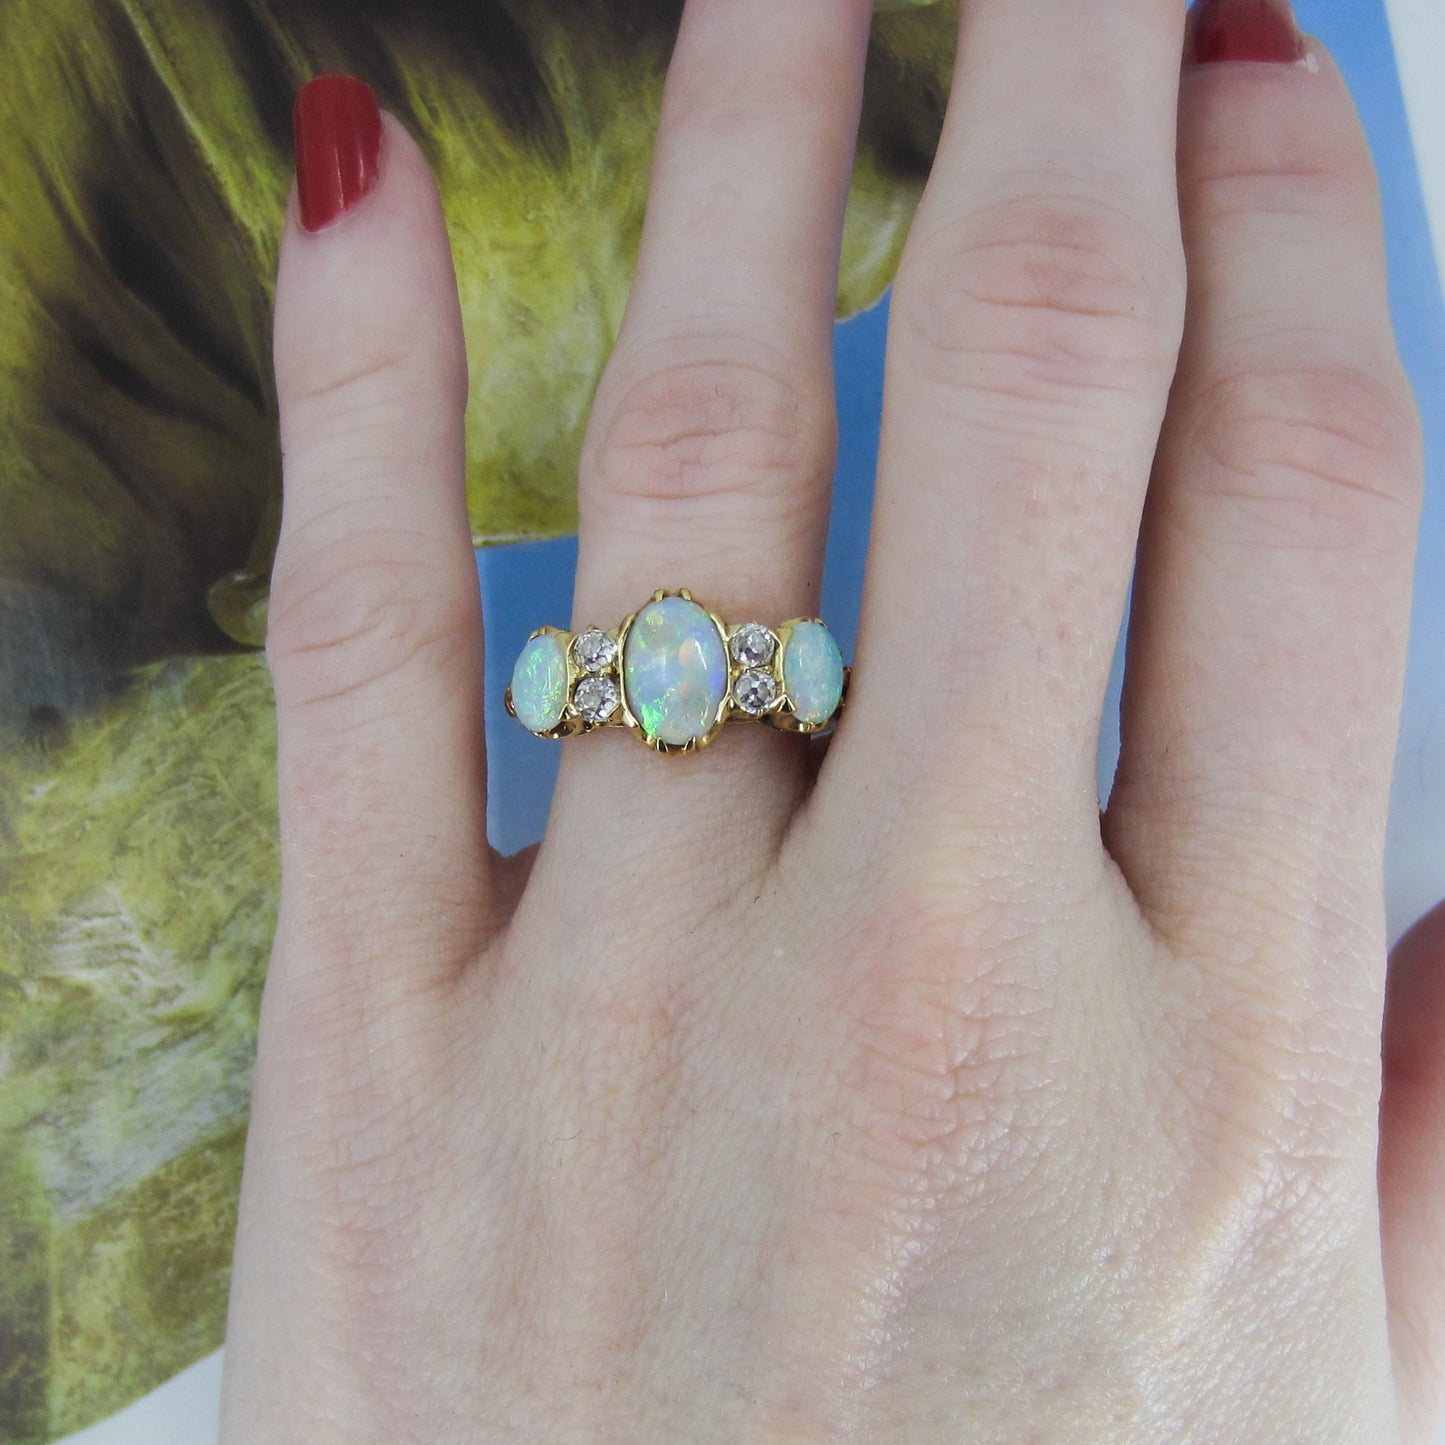 SOLD-Victorian Opal and Old Mine Diamond Ring 18k c. 1890